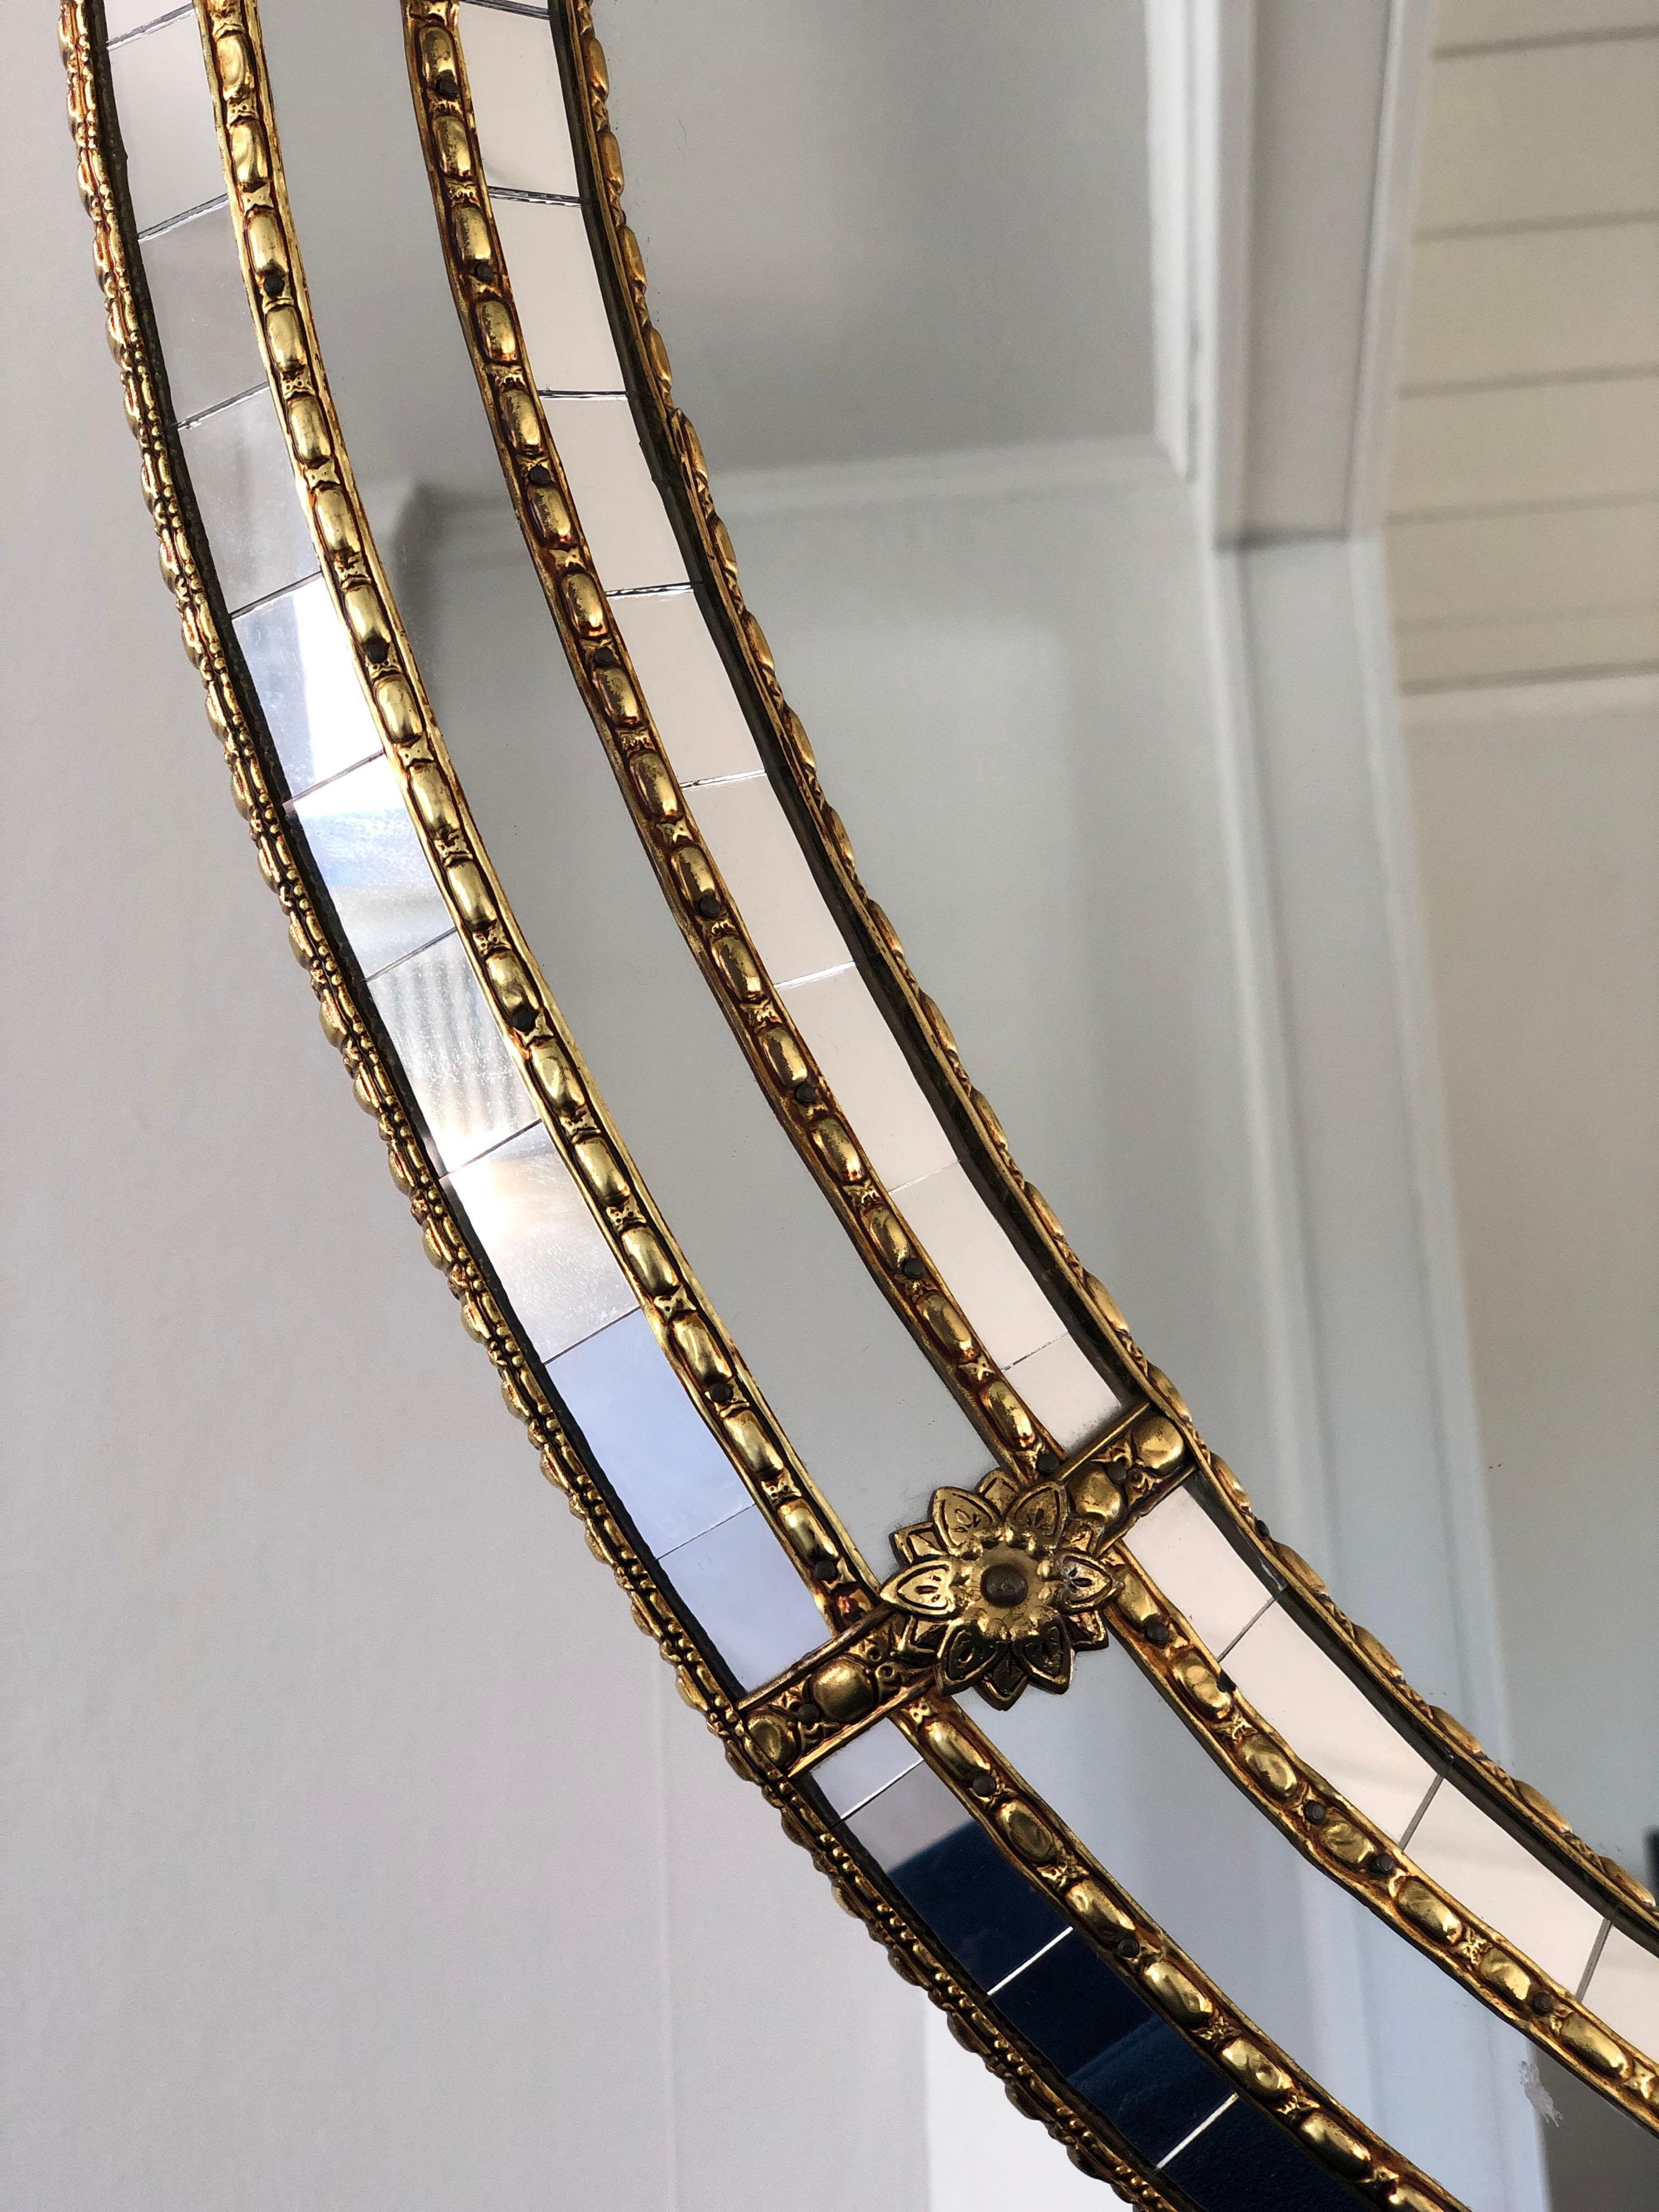 Beautiful Spanish oval mirror with a Venetian glass frame with a brass golden strip. The frame is made with small crystals both on the outside and inside, and larger ones in the center line. The brass strip holds the mirrors together.

Handmade